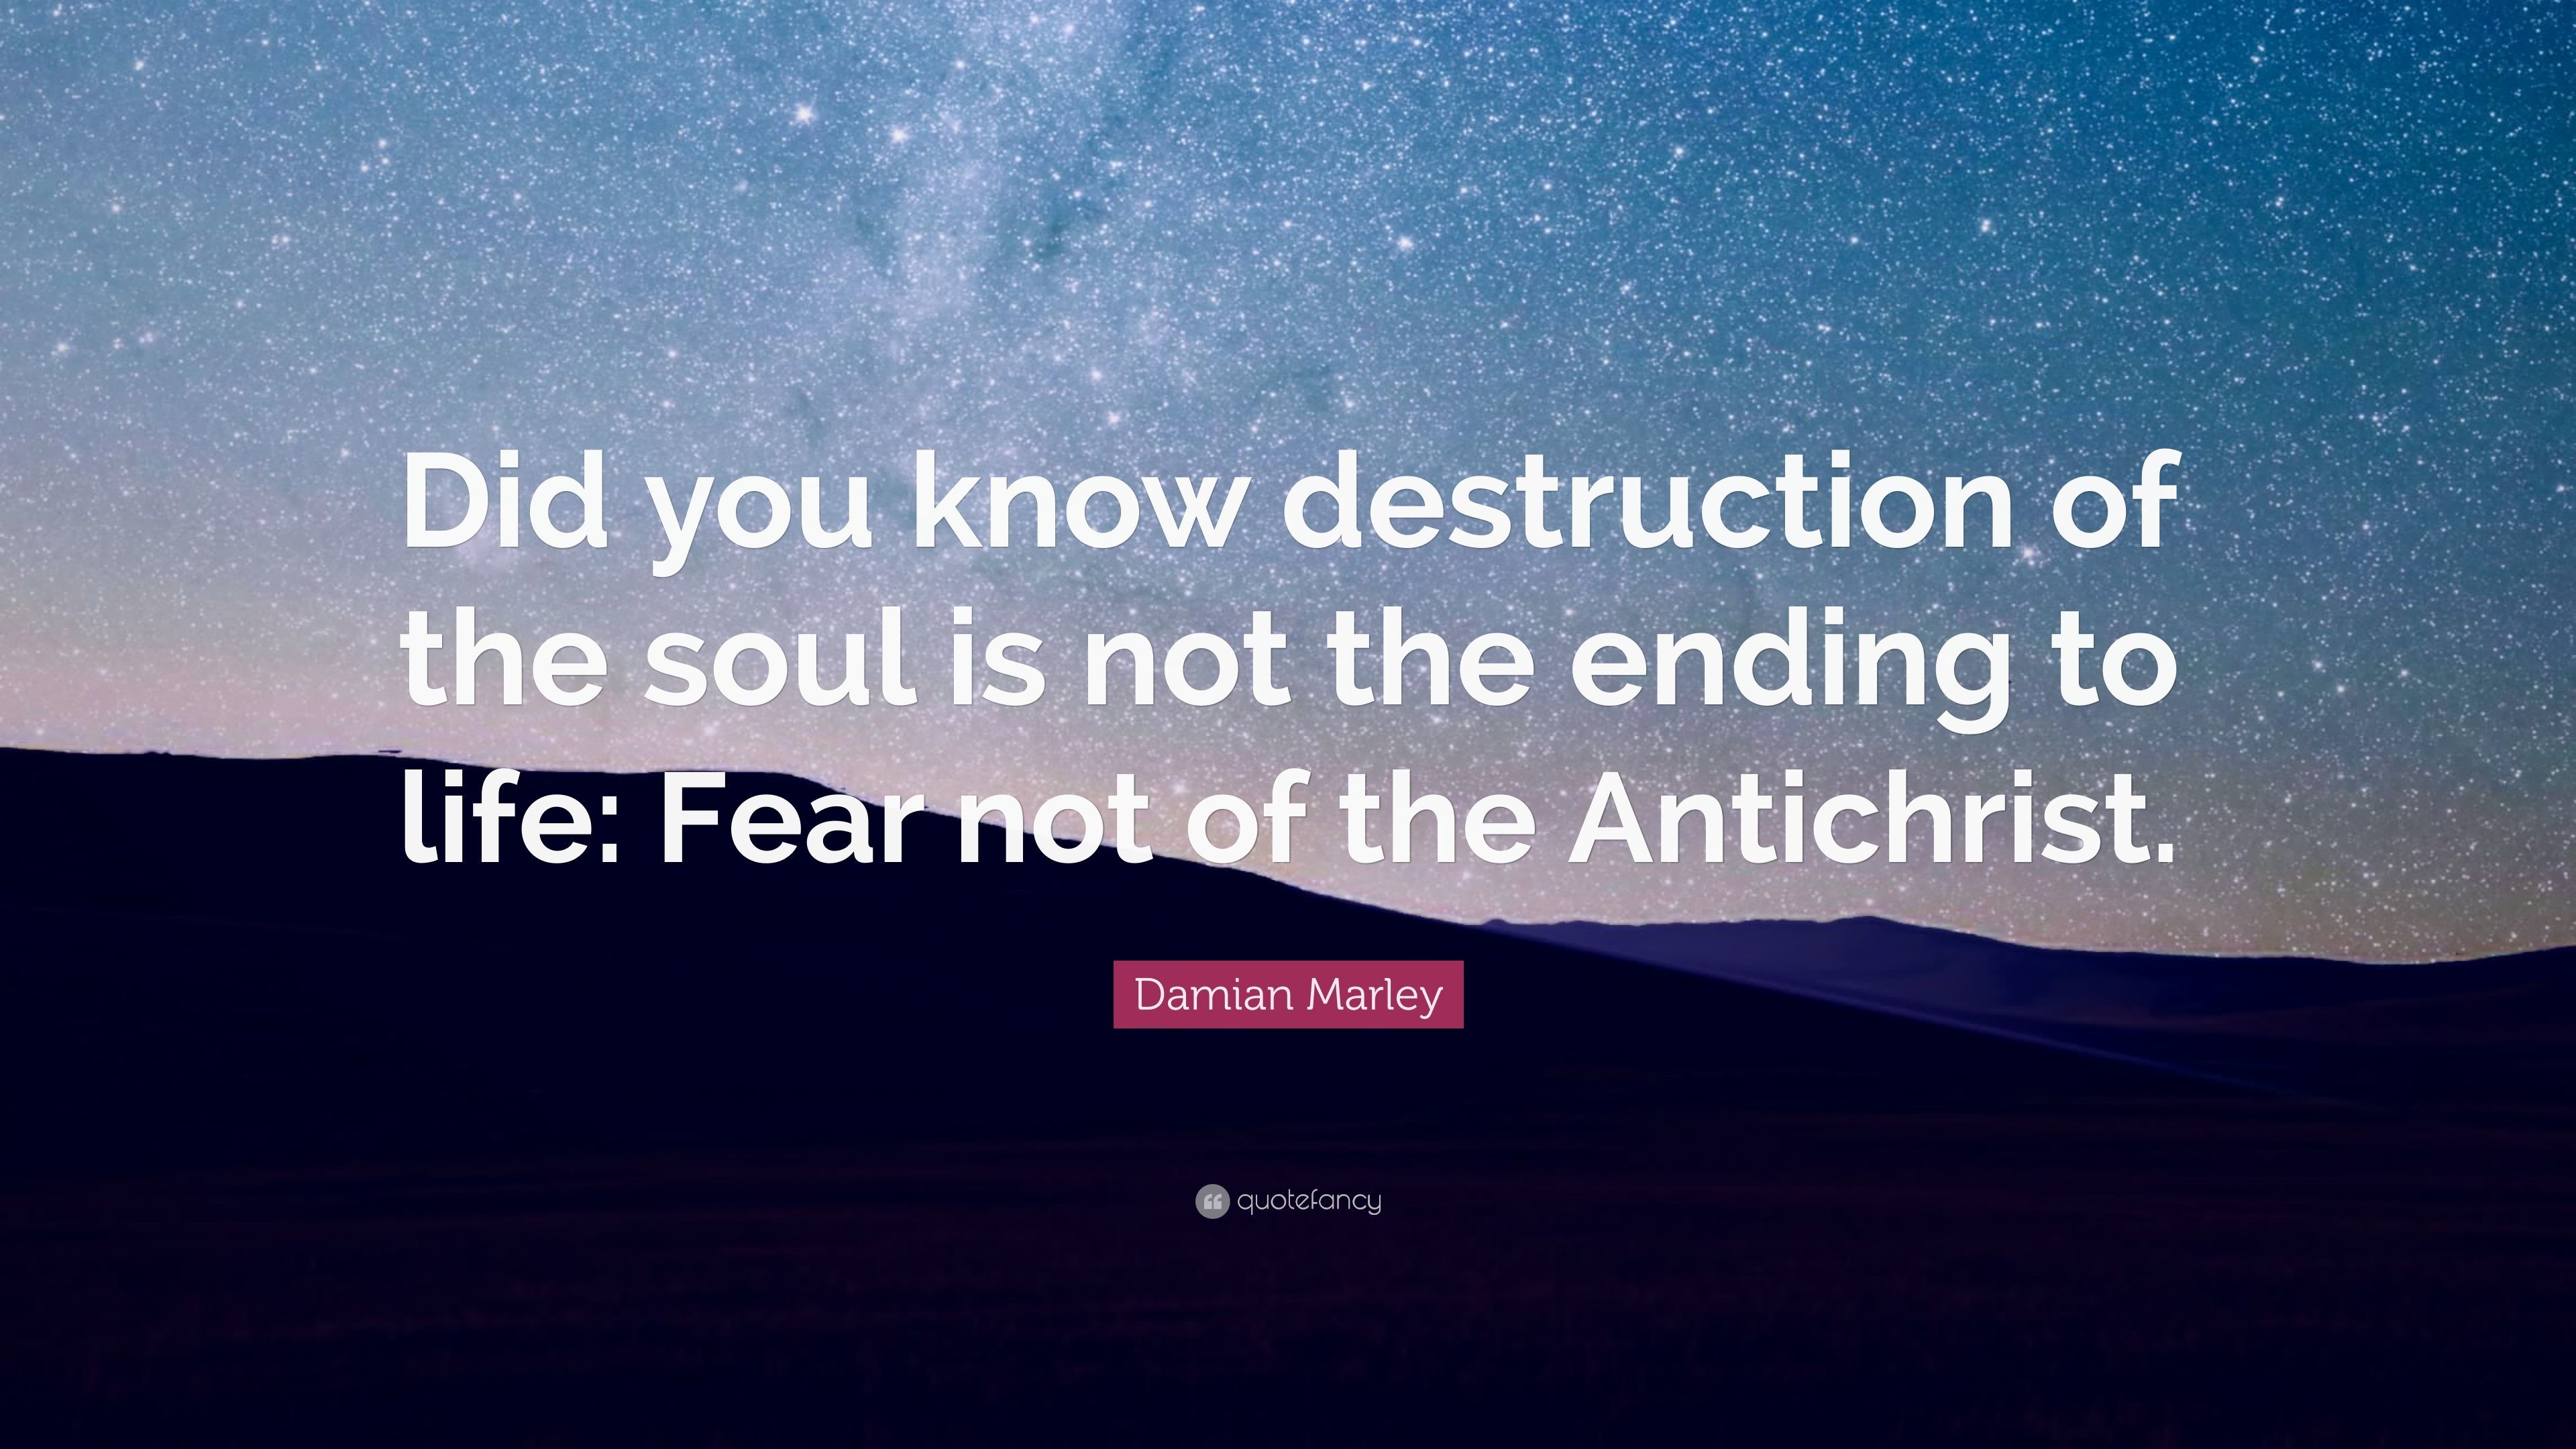 3840x2160 Damian Marley Quote: “Did you know destruction of the soul is not the ending